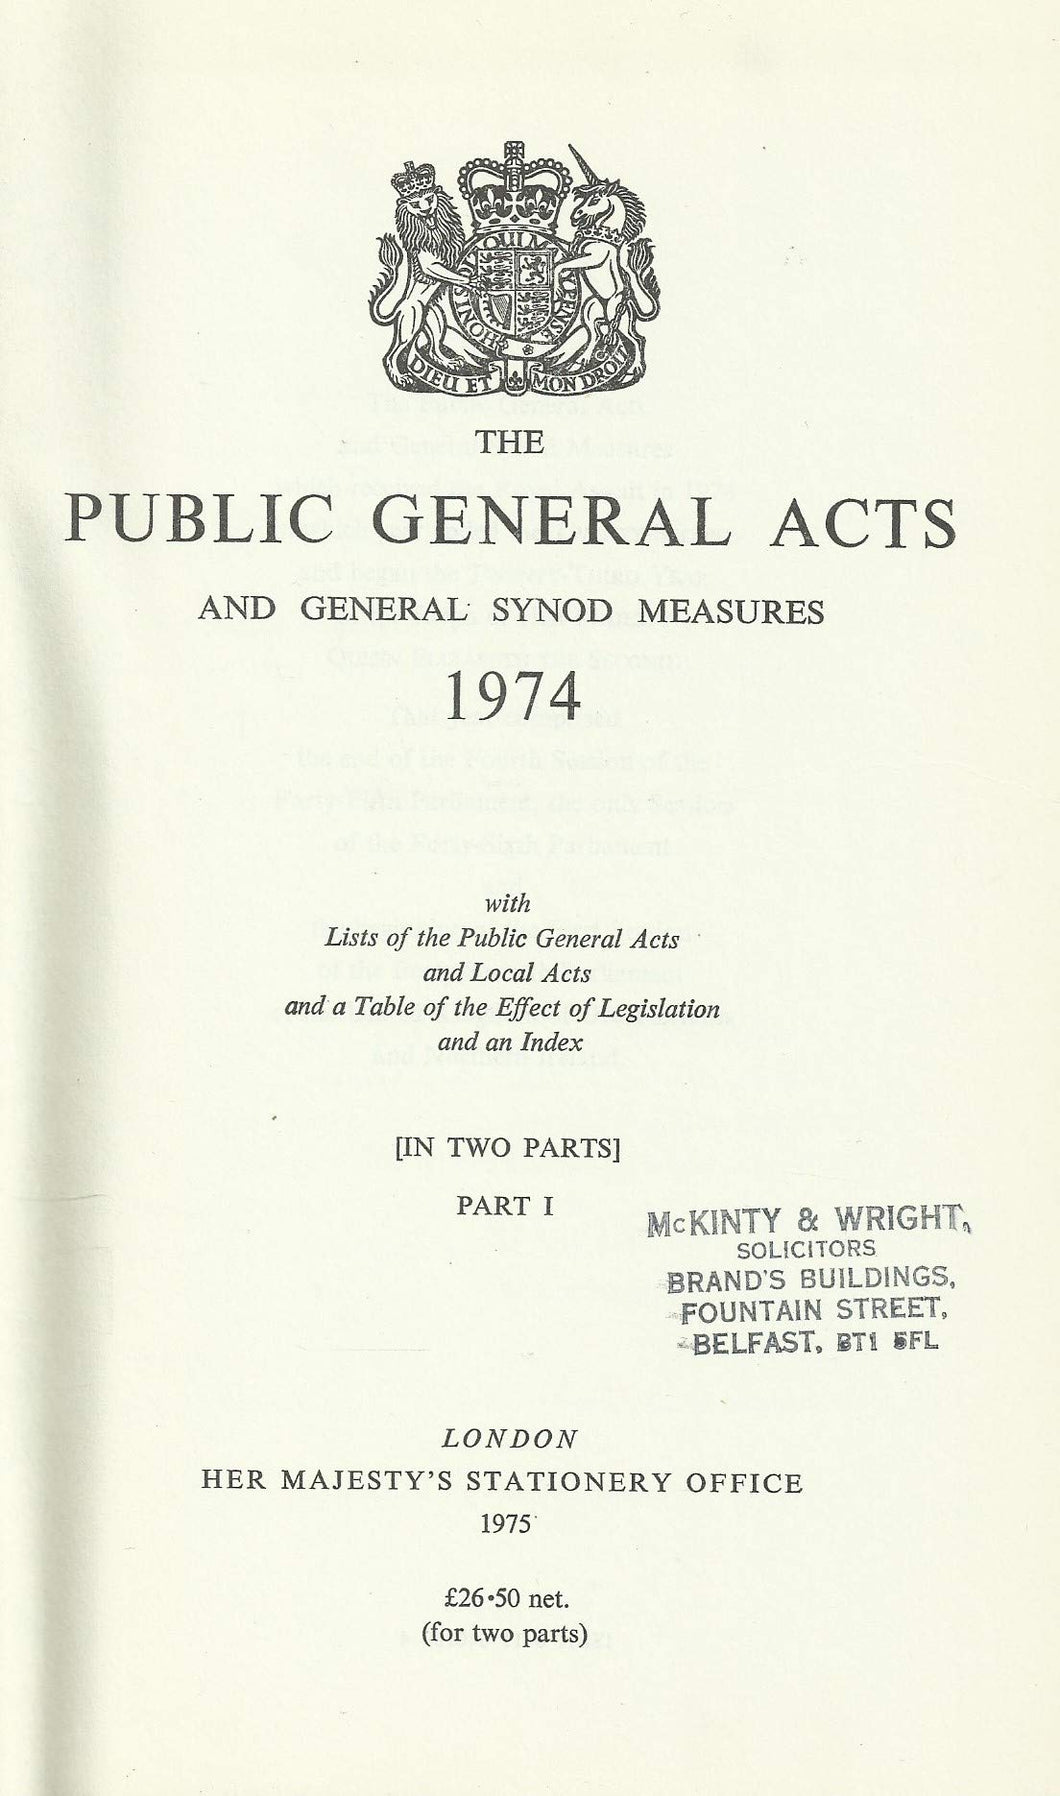 The Public General Acts and General Synod Measures 1974